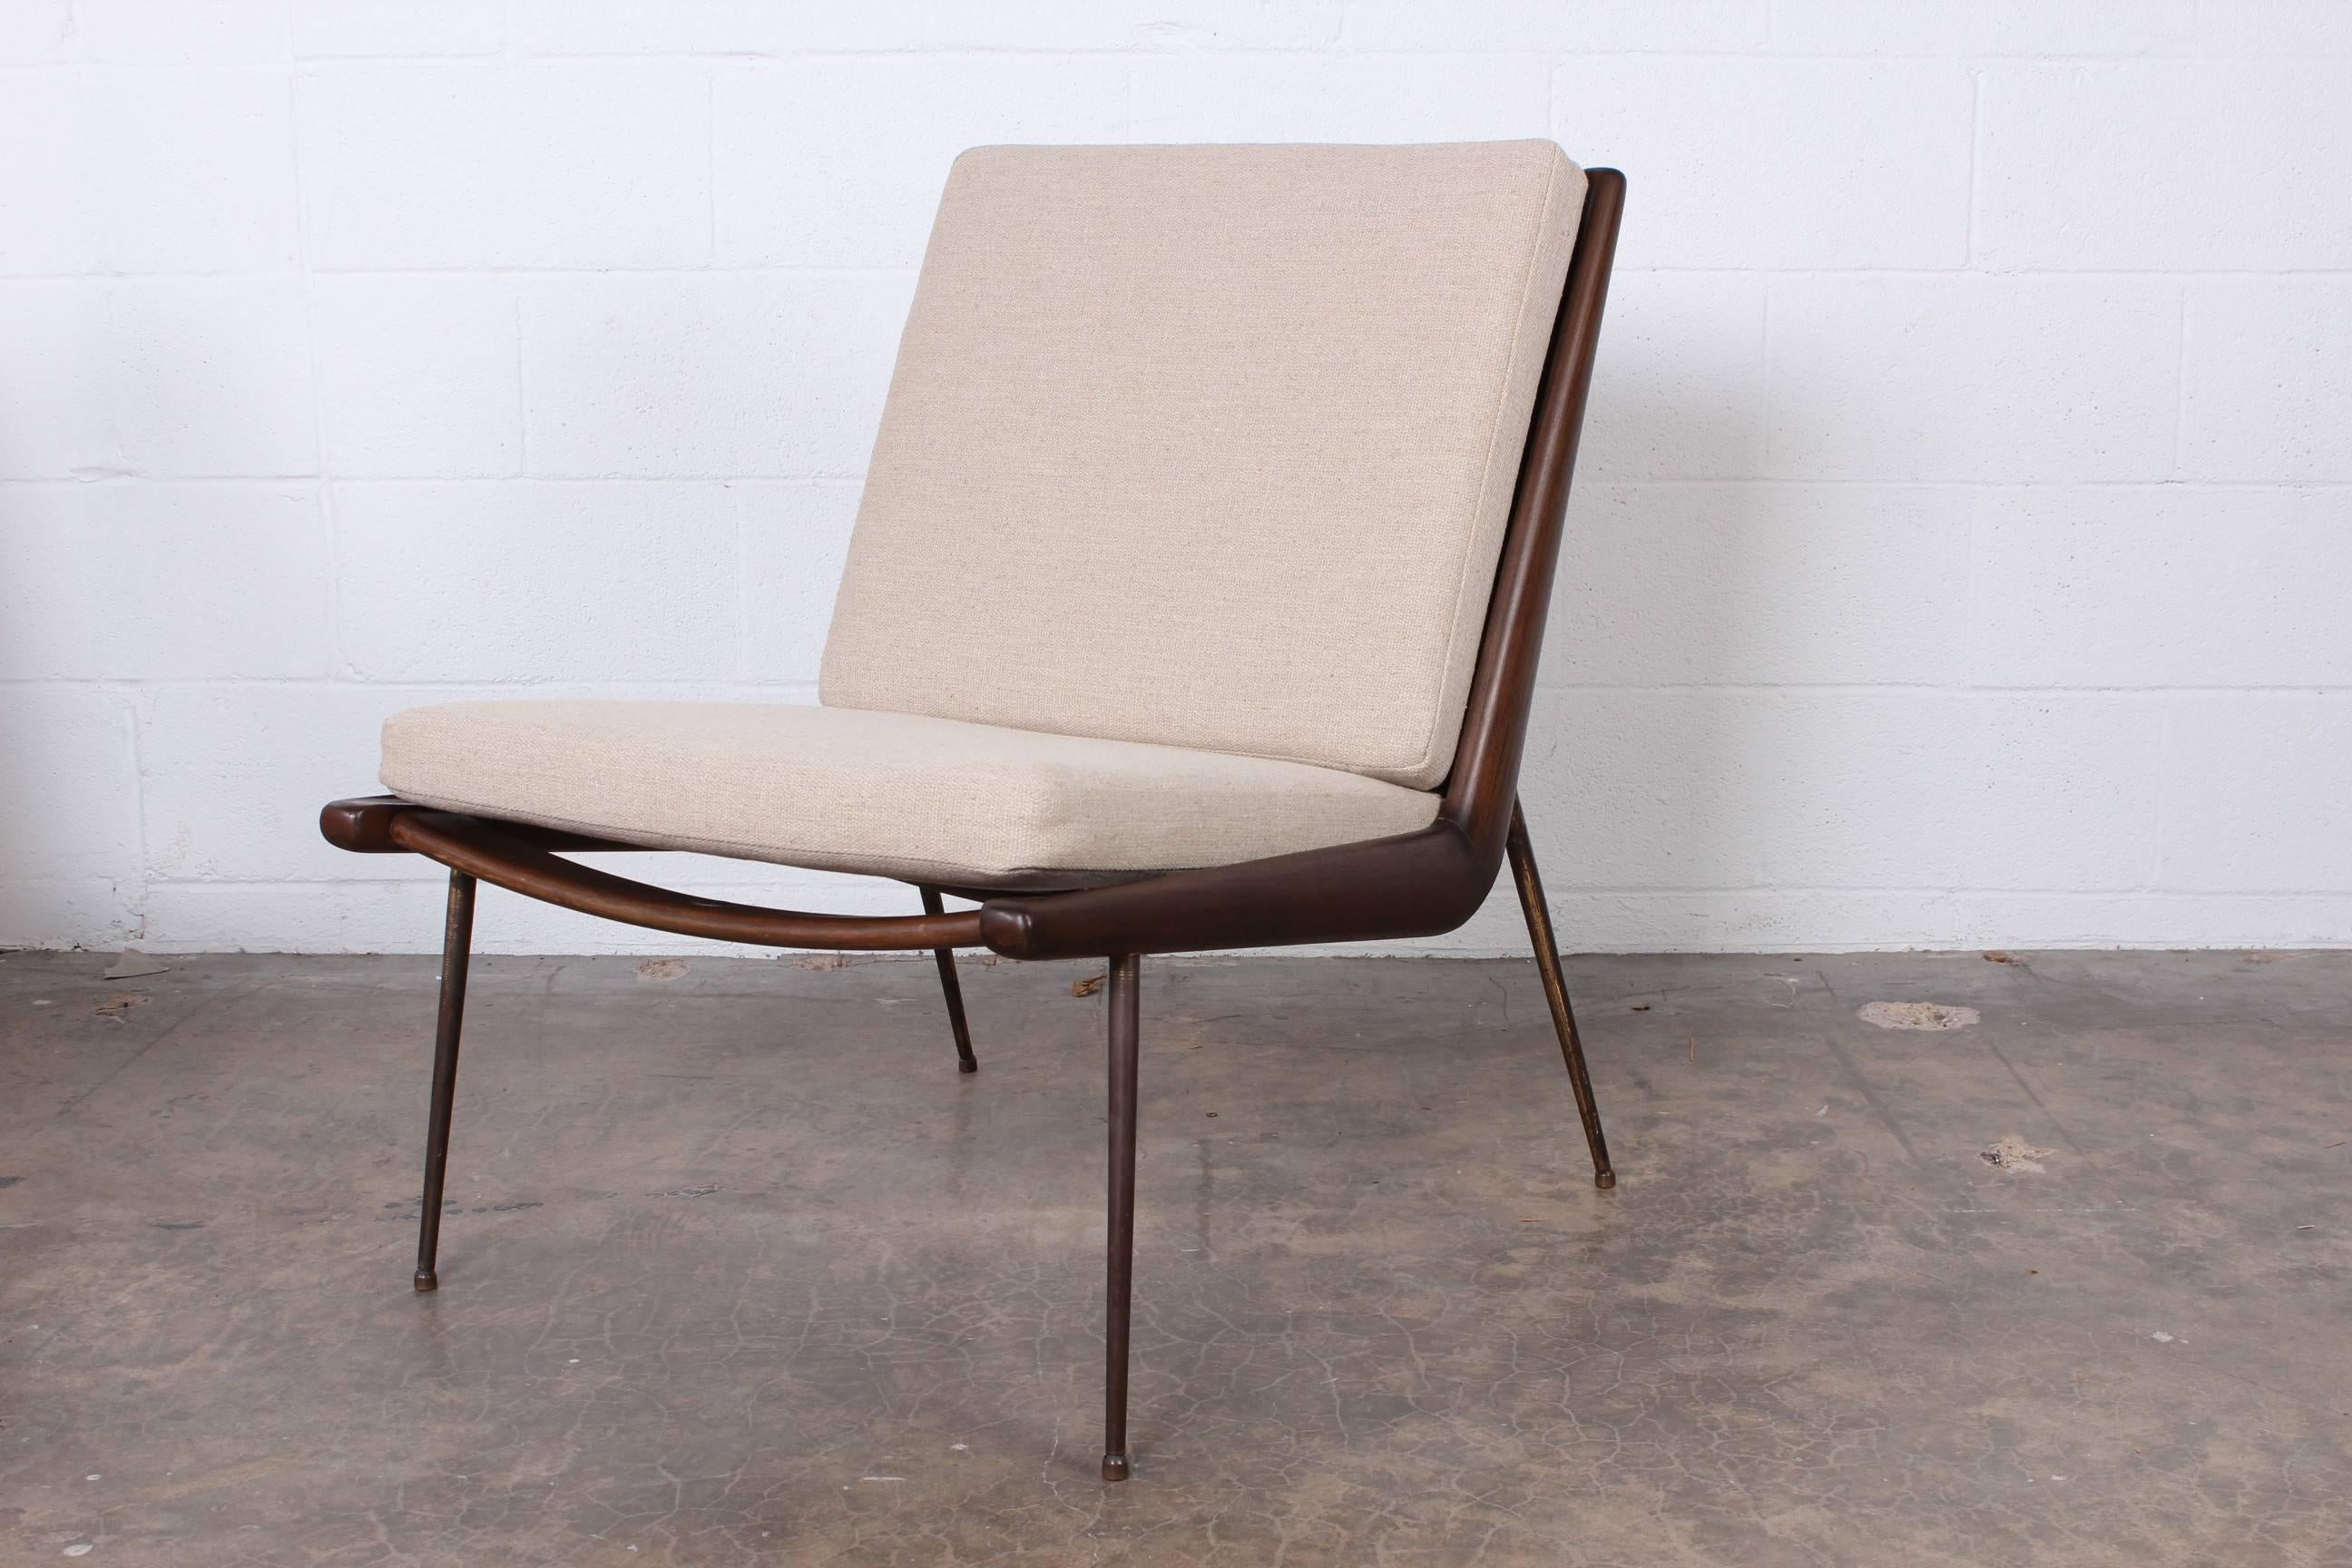 Mid-20th Century Pair of Lounge Chairs by Peter Hvidt and Orla Mølgaard-Nielsen